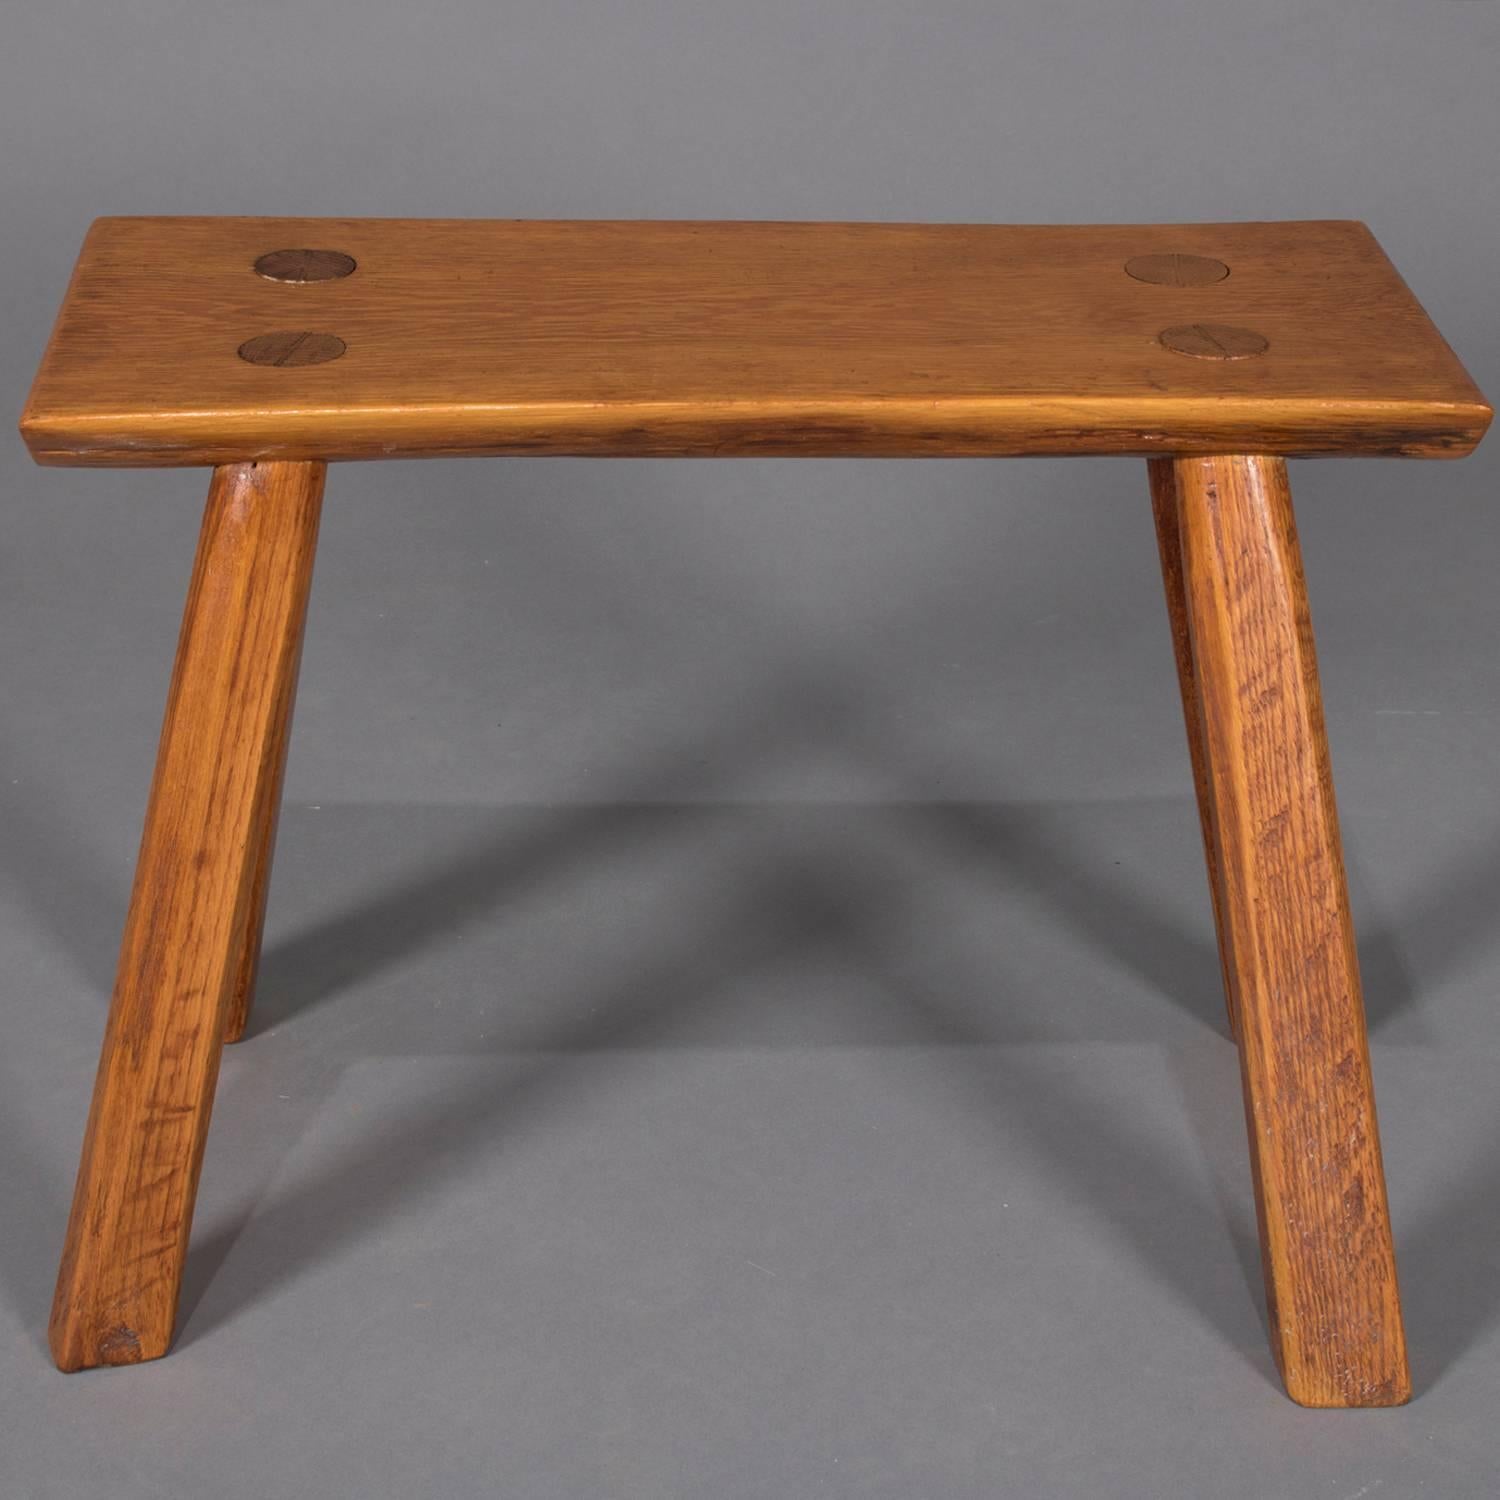 20th Century Adirondack Old Hickory School Hand-Carved Mortise & Tenon Slab Wood Bench